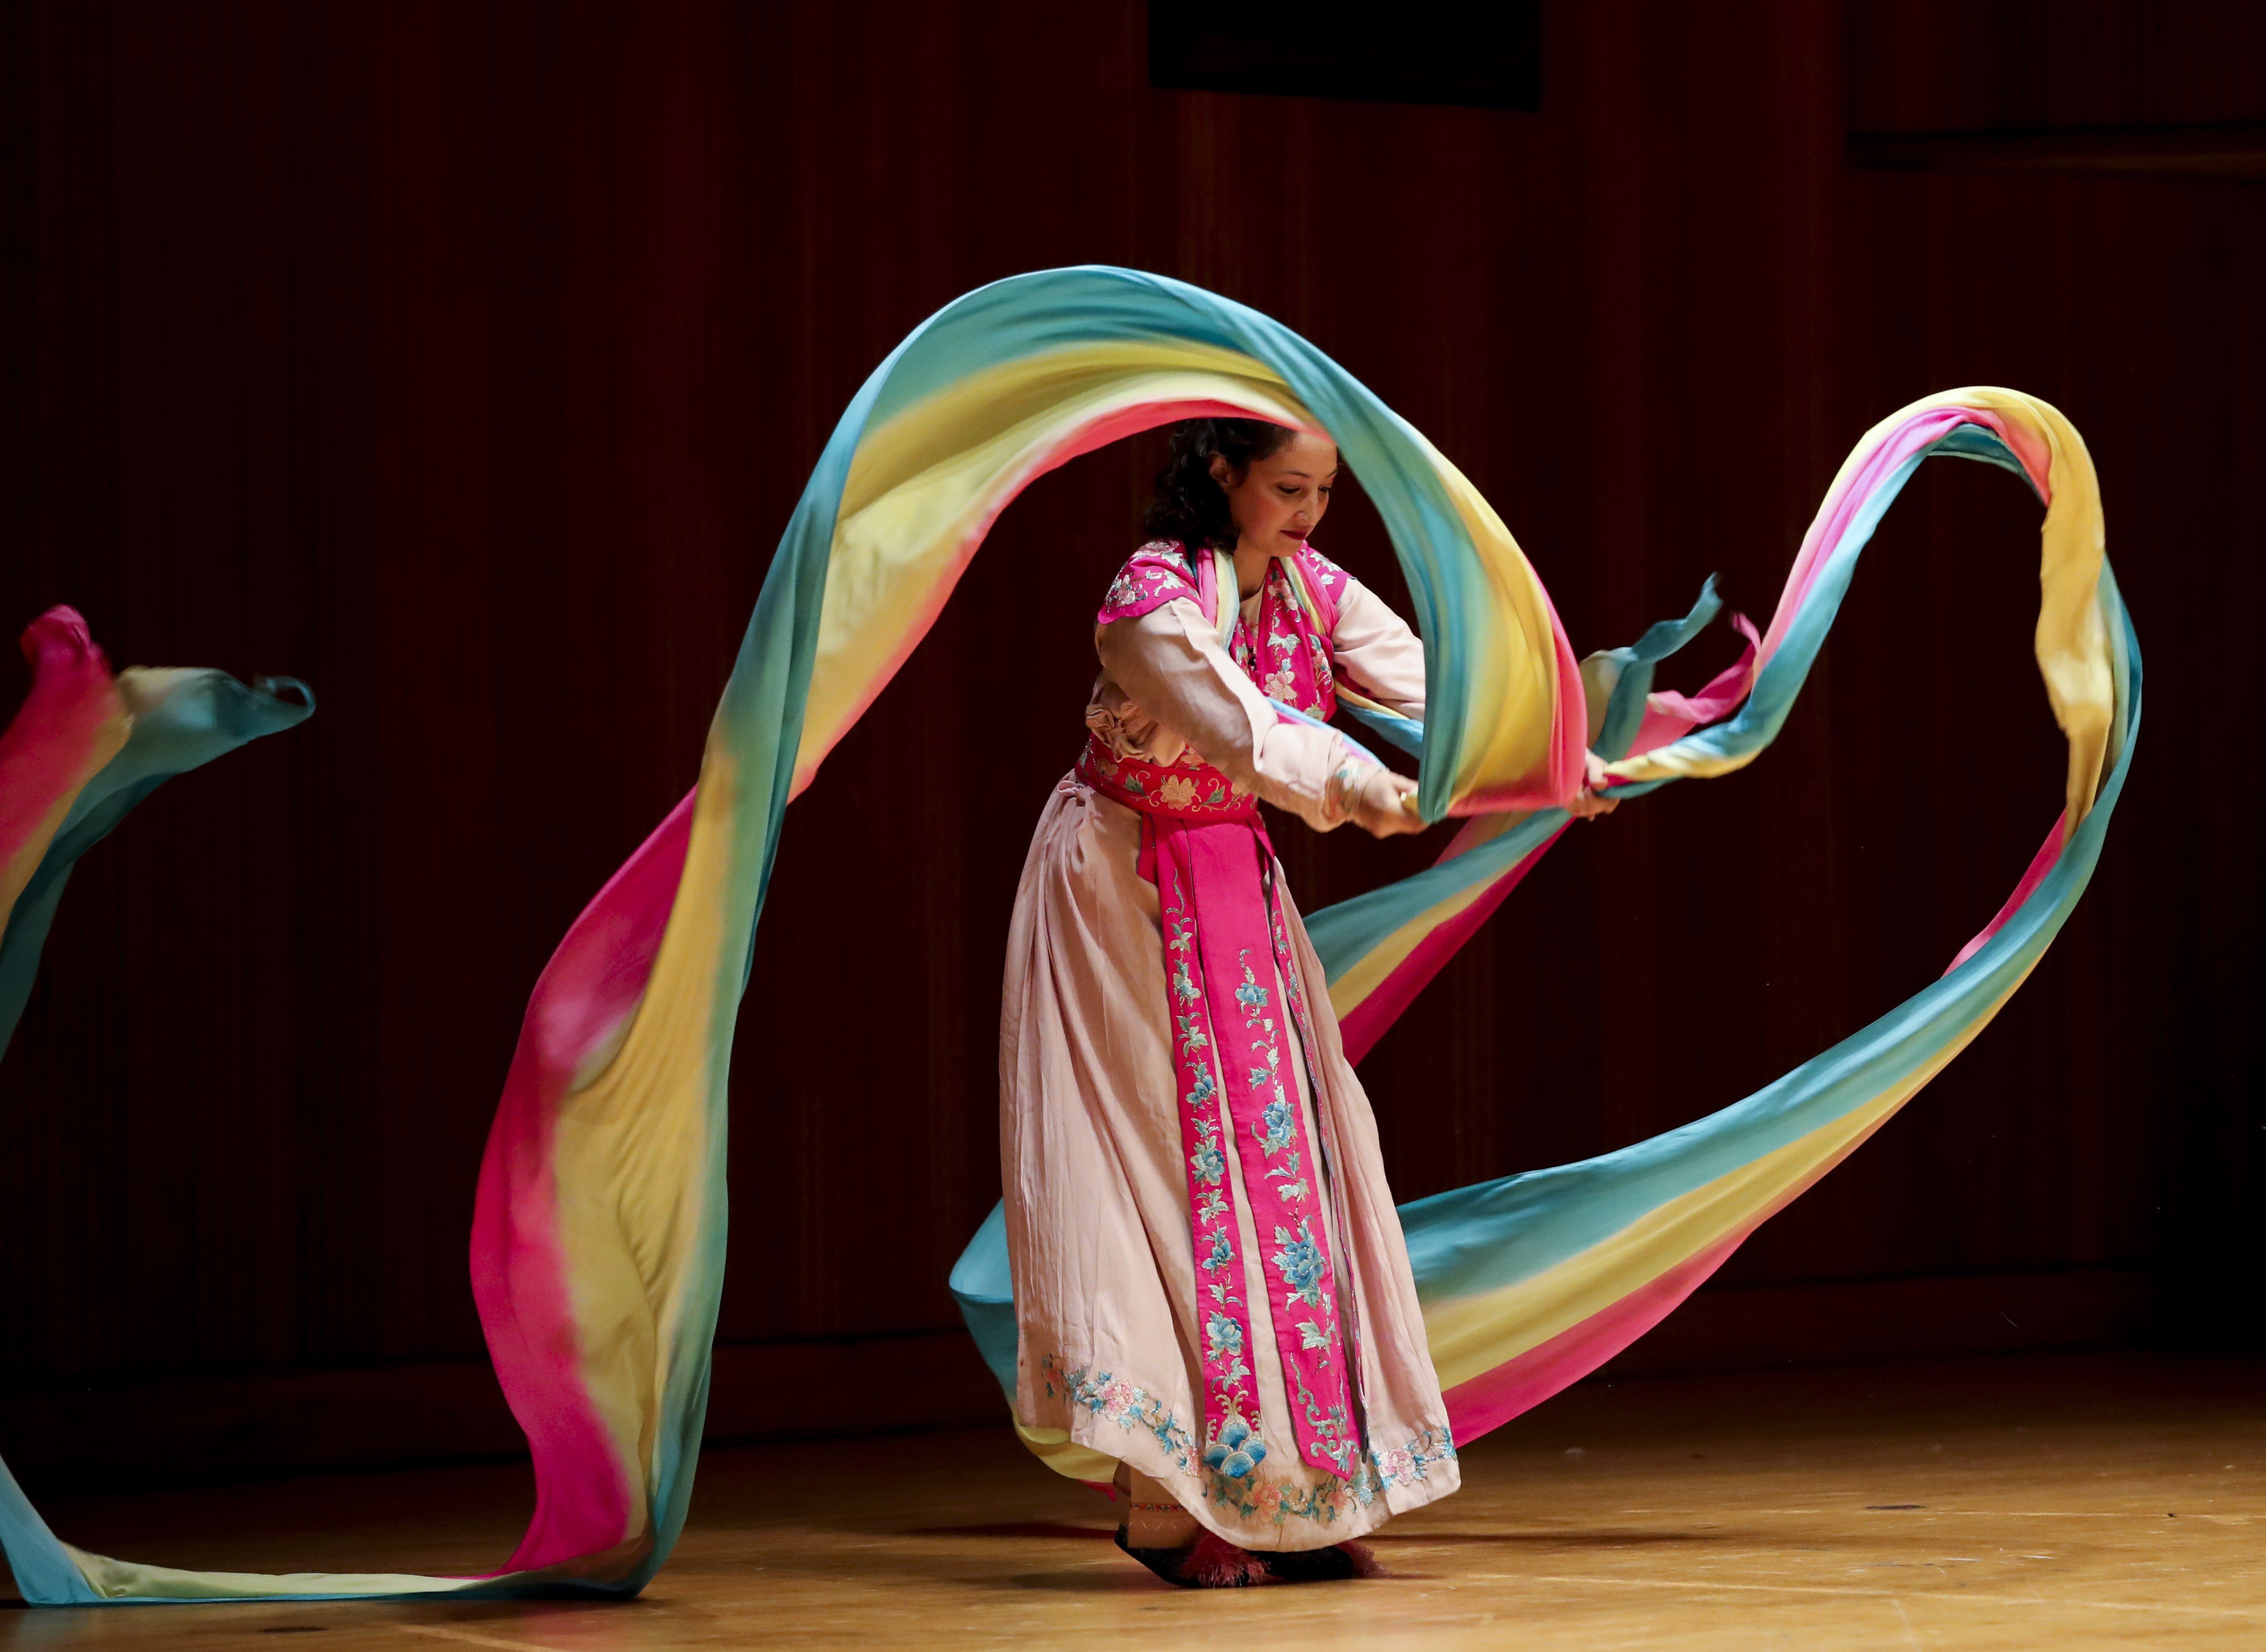 Carrie Feyerabend from the Confucius Institute of Chinese Opera at Binghamton University performs during the Amazing Chinese Opera show at the University at Buffalo in New York state, on November 16. China’s Confucius Institutes, centres teaching Chinese language and culture funded by a Chinese government-affiliated entity, have come under suspicion in the West. Photo: Xinhua